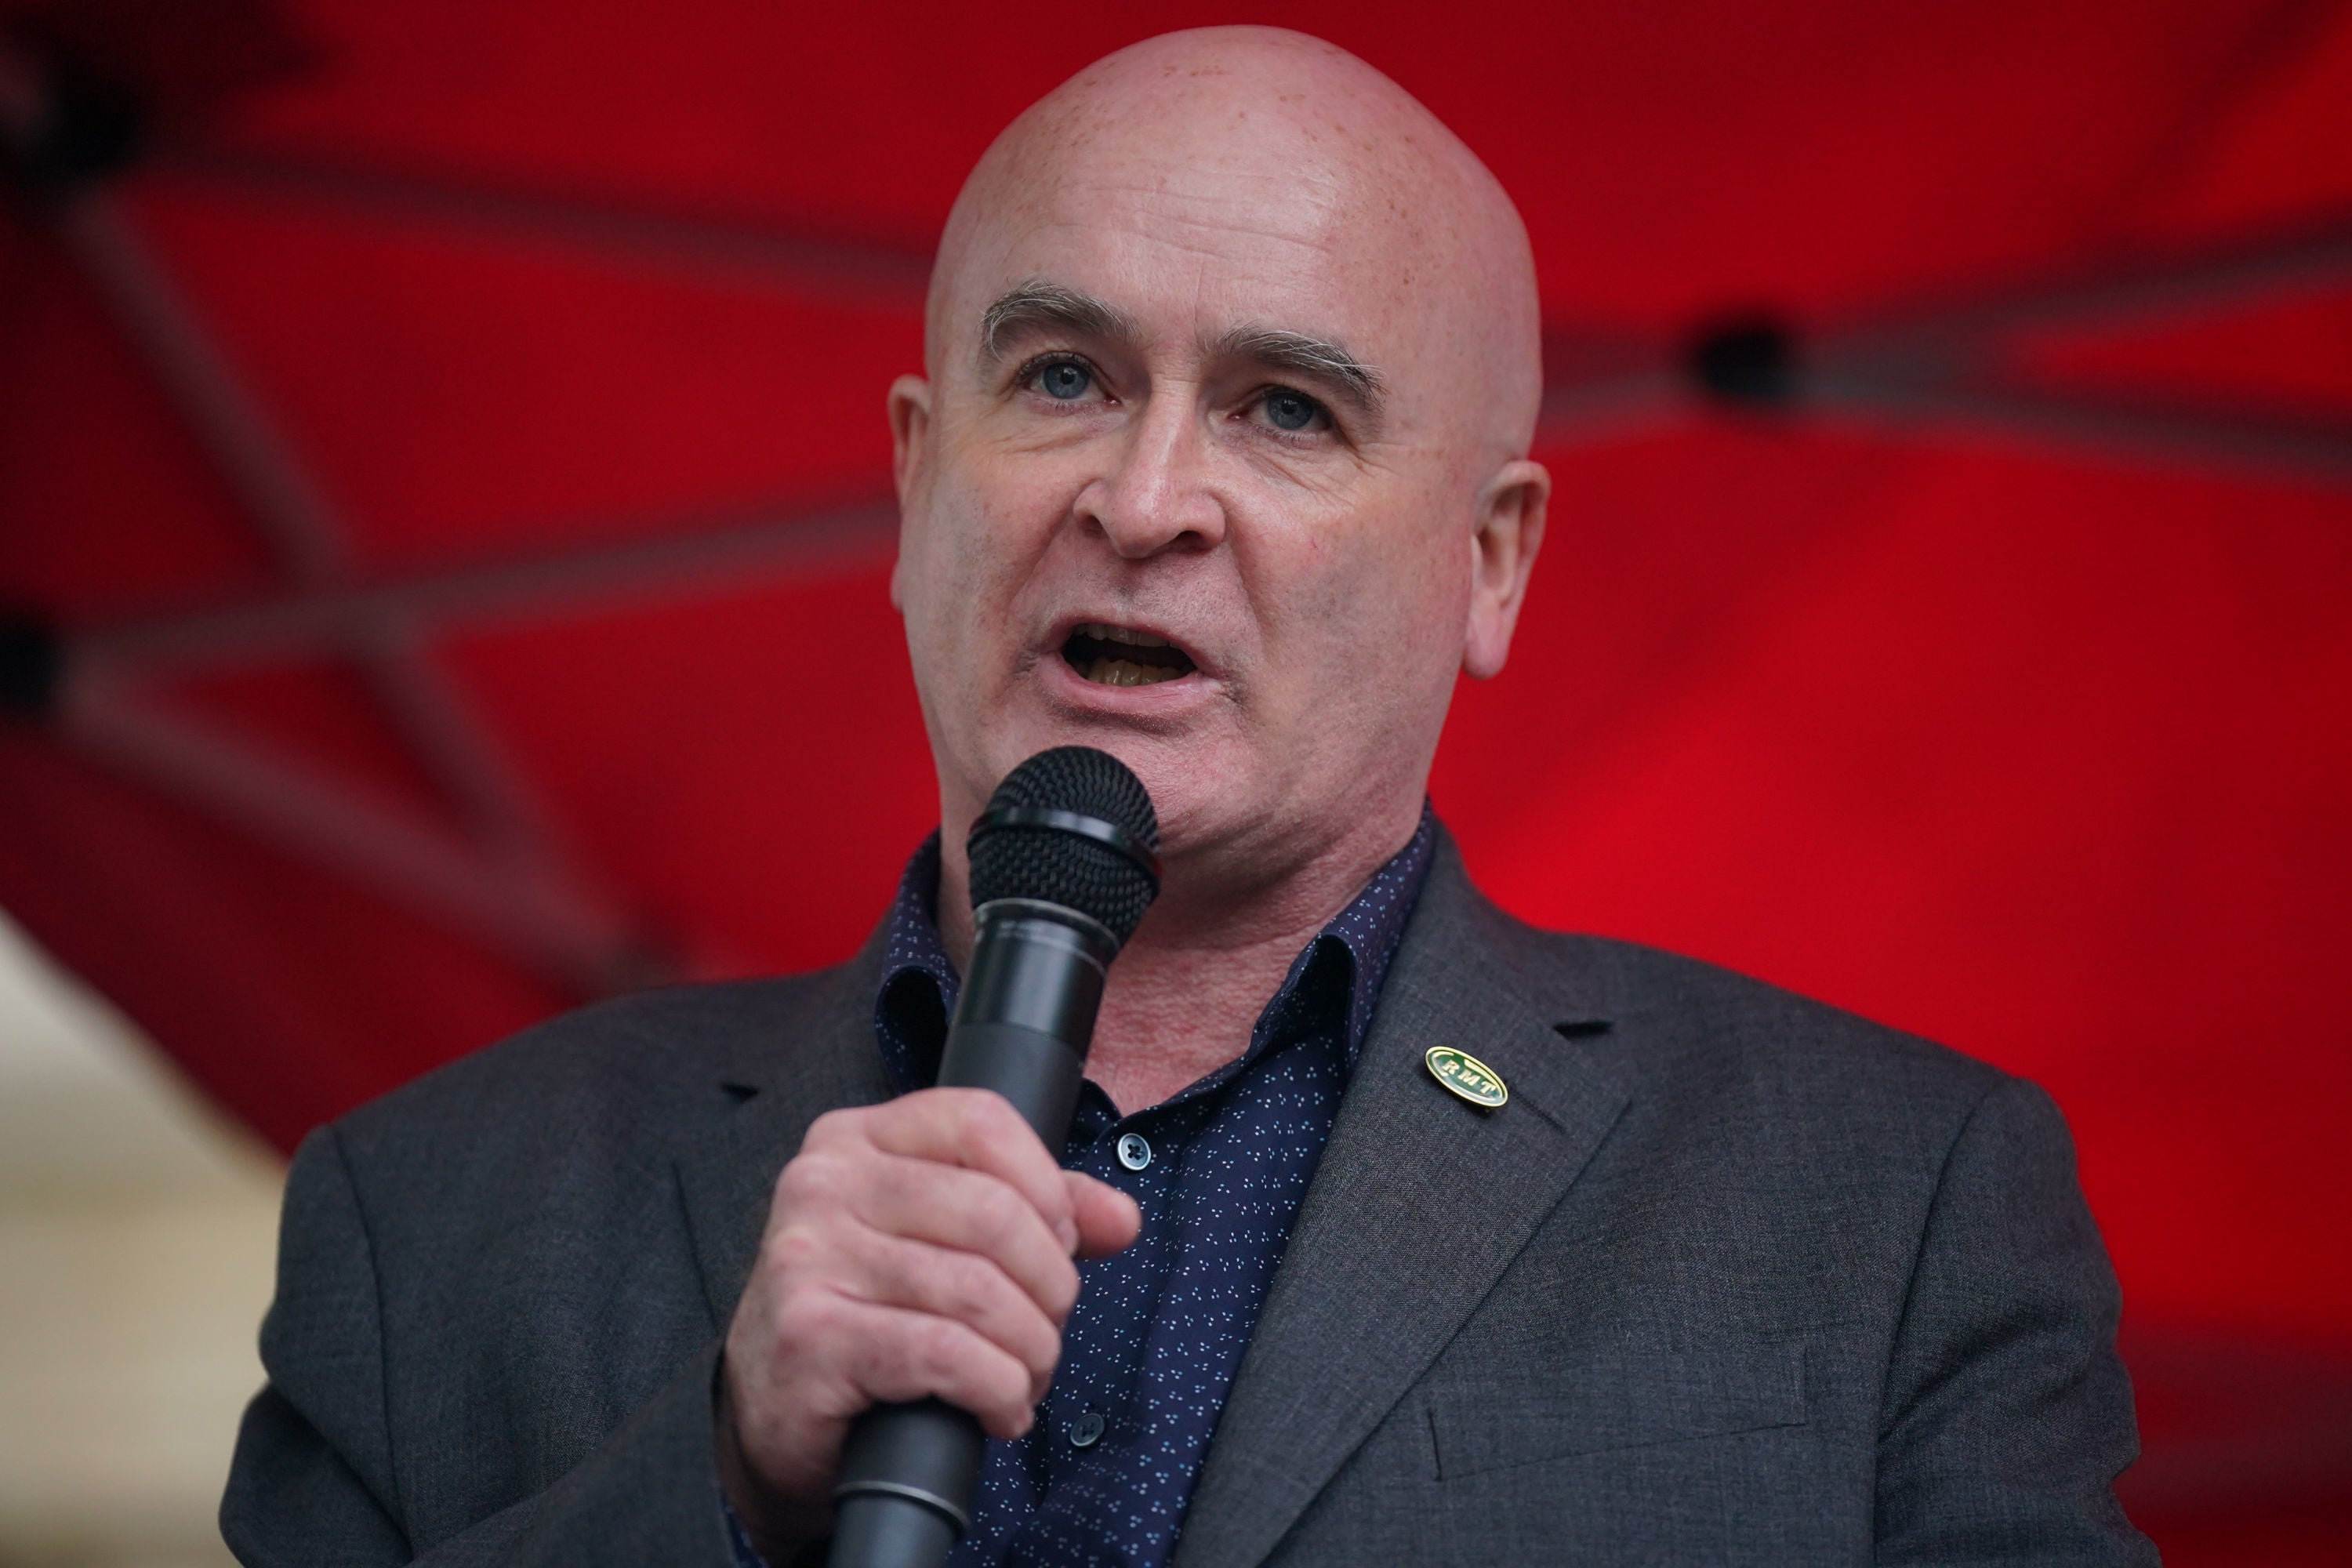 RMT union leader Mick Lynch welcomed ‘positive discussions’